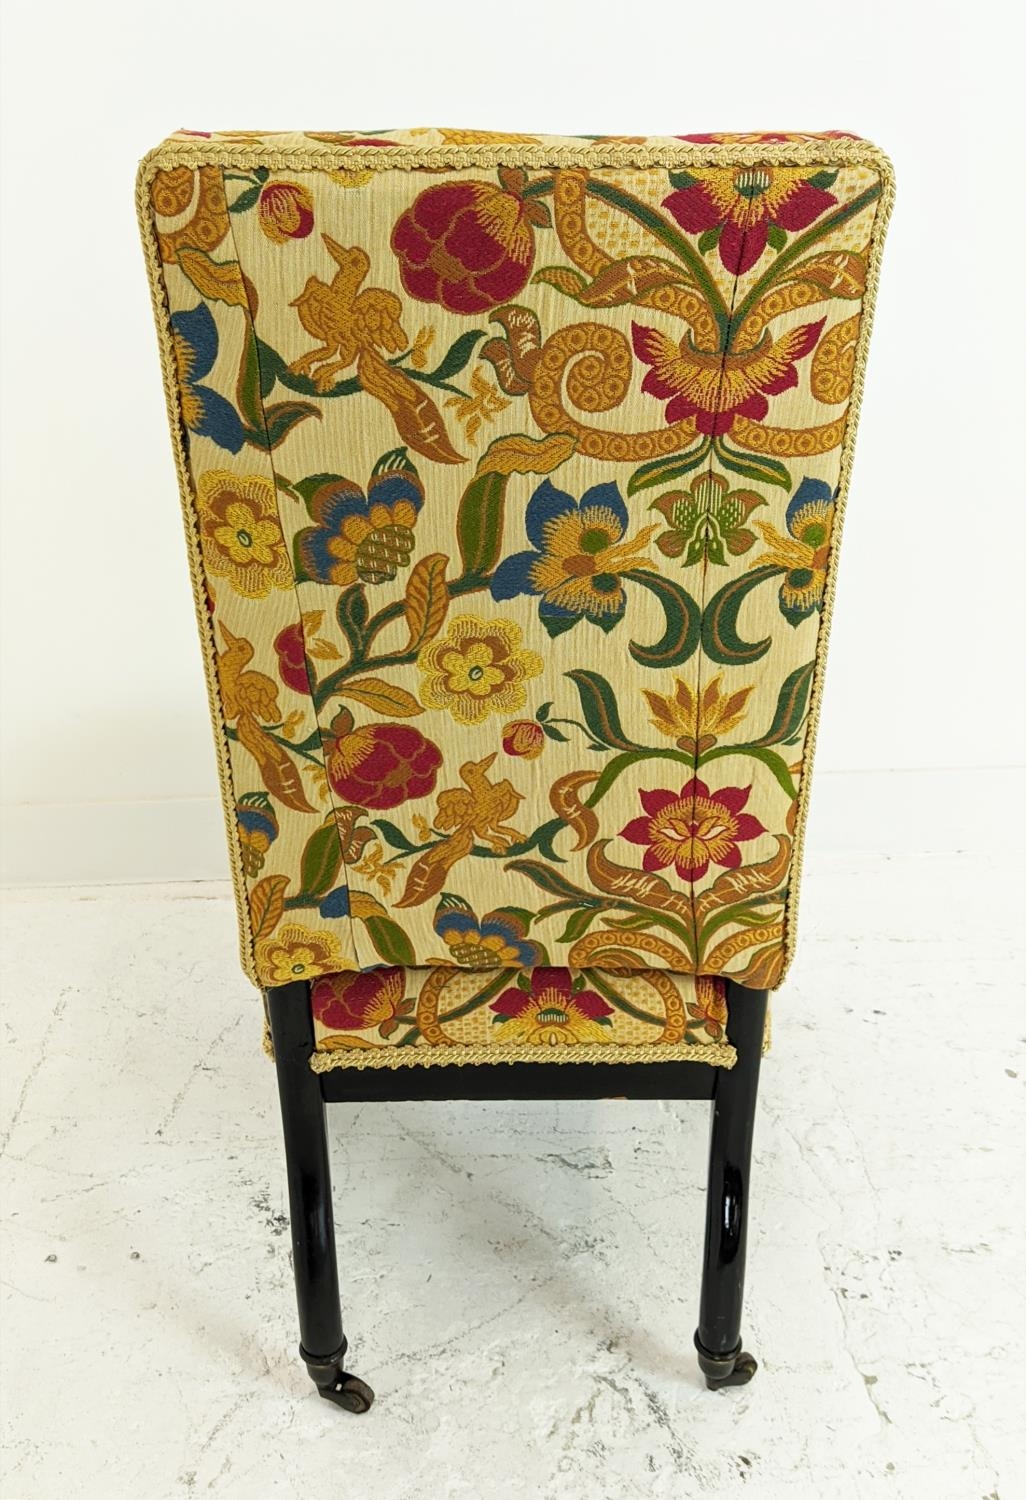 SLIPPER CHAIR, 19th century ebonised with William Morris patterned upholstery, 96cm H x 51cm W. - Image 14 of 18